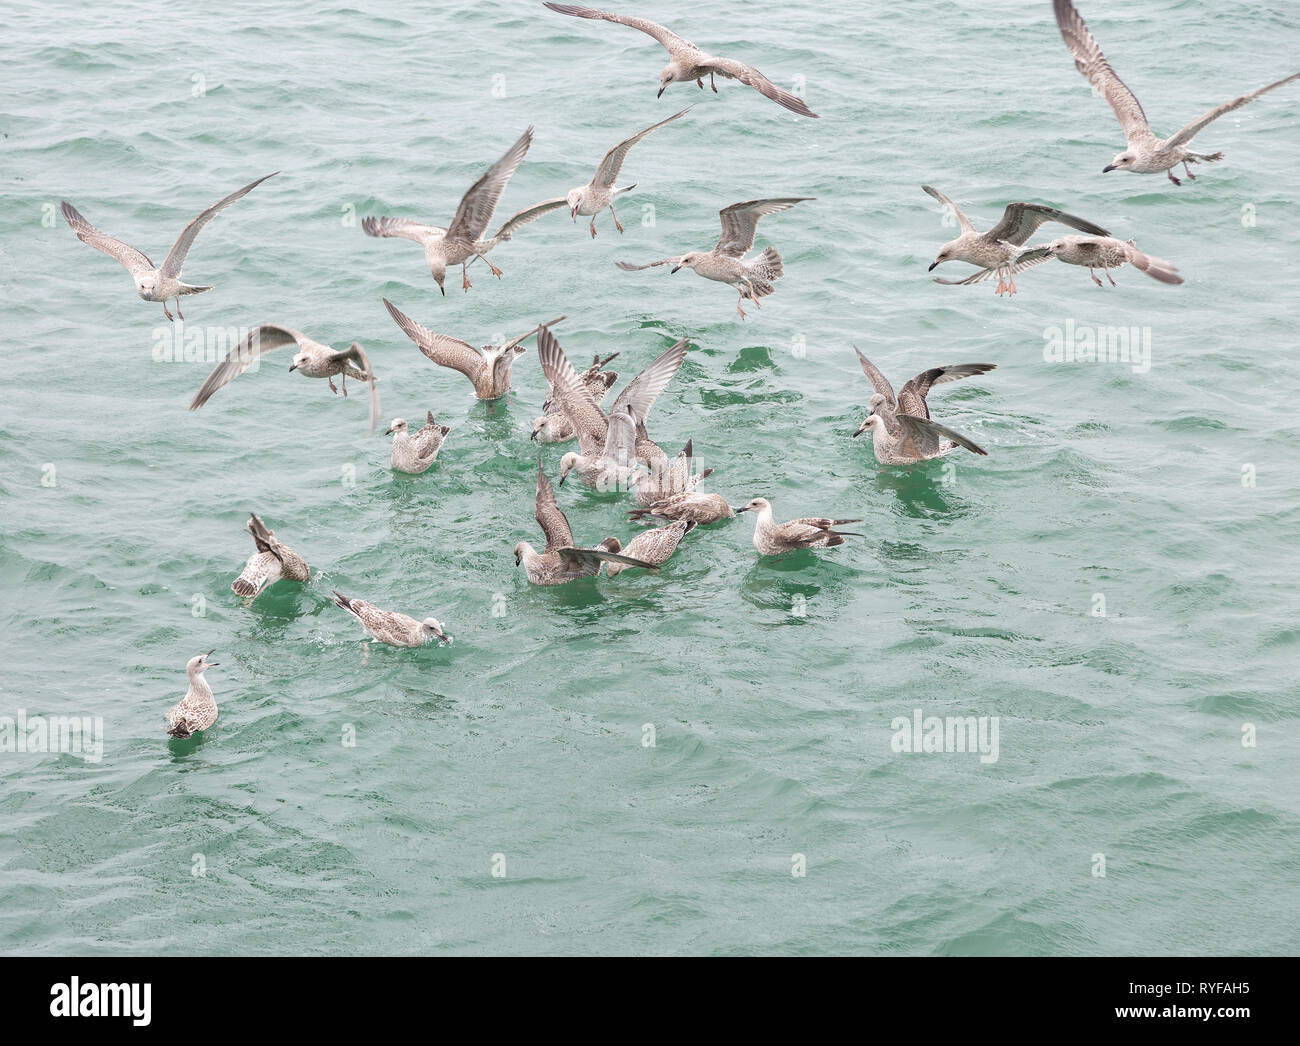 Group of young gulls fighting over food scraps Stock Photo